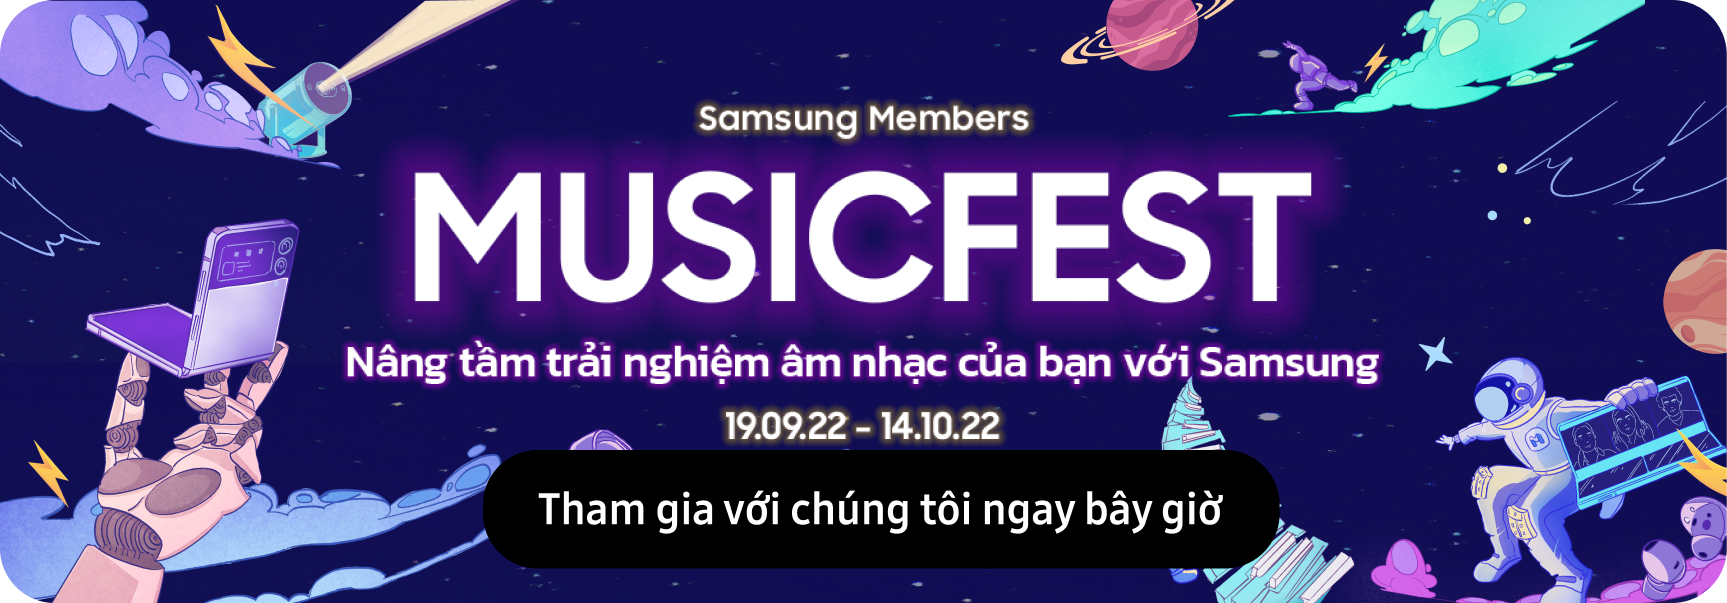 samsung member musicfest amplify your music experience with samsung 19.09.22-14.10.22